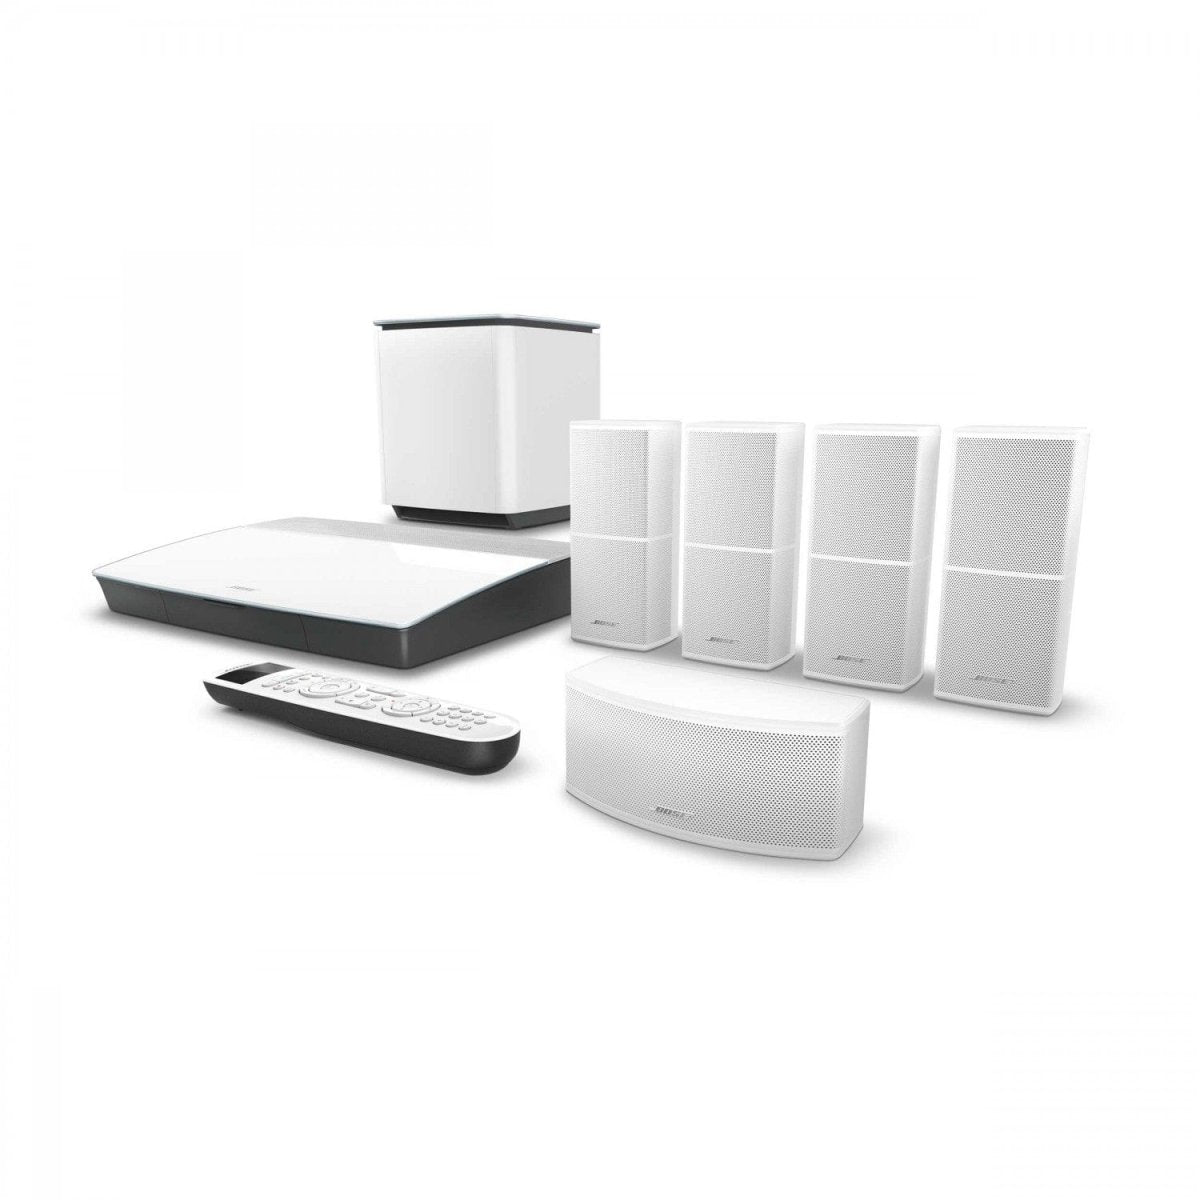 BOSE Lifestyle 600 5.1 Channel Home Theatre Speaker System - White (Manufacturer Refurbished) - Atlantic Electrics